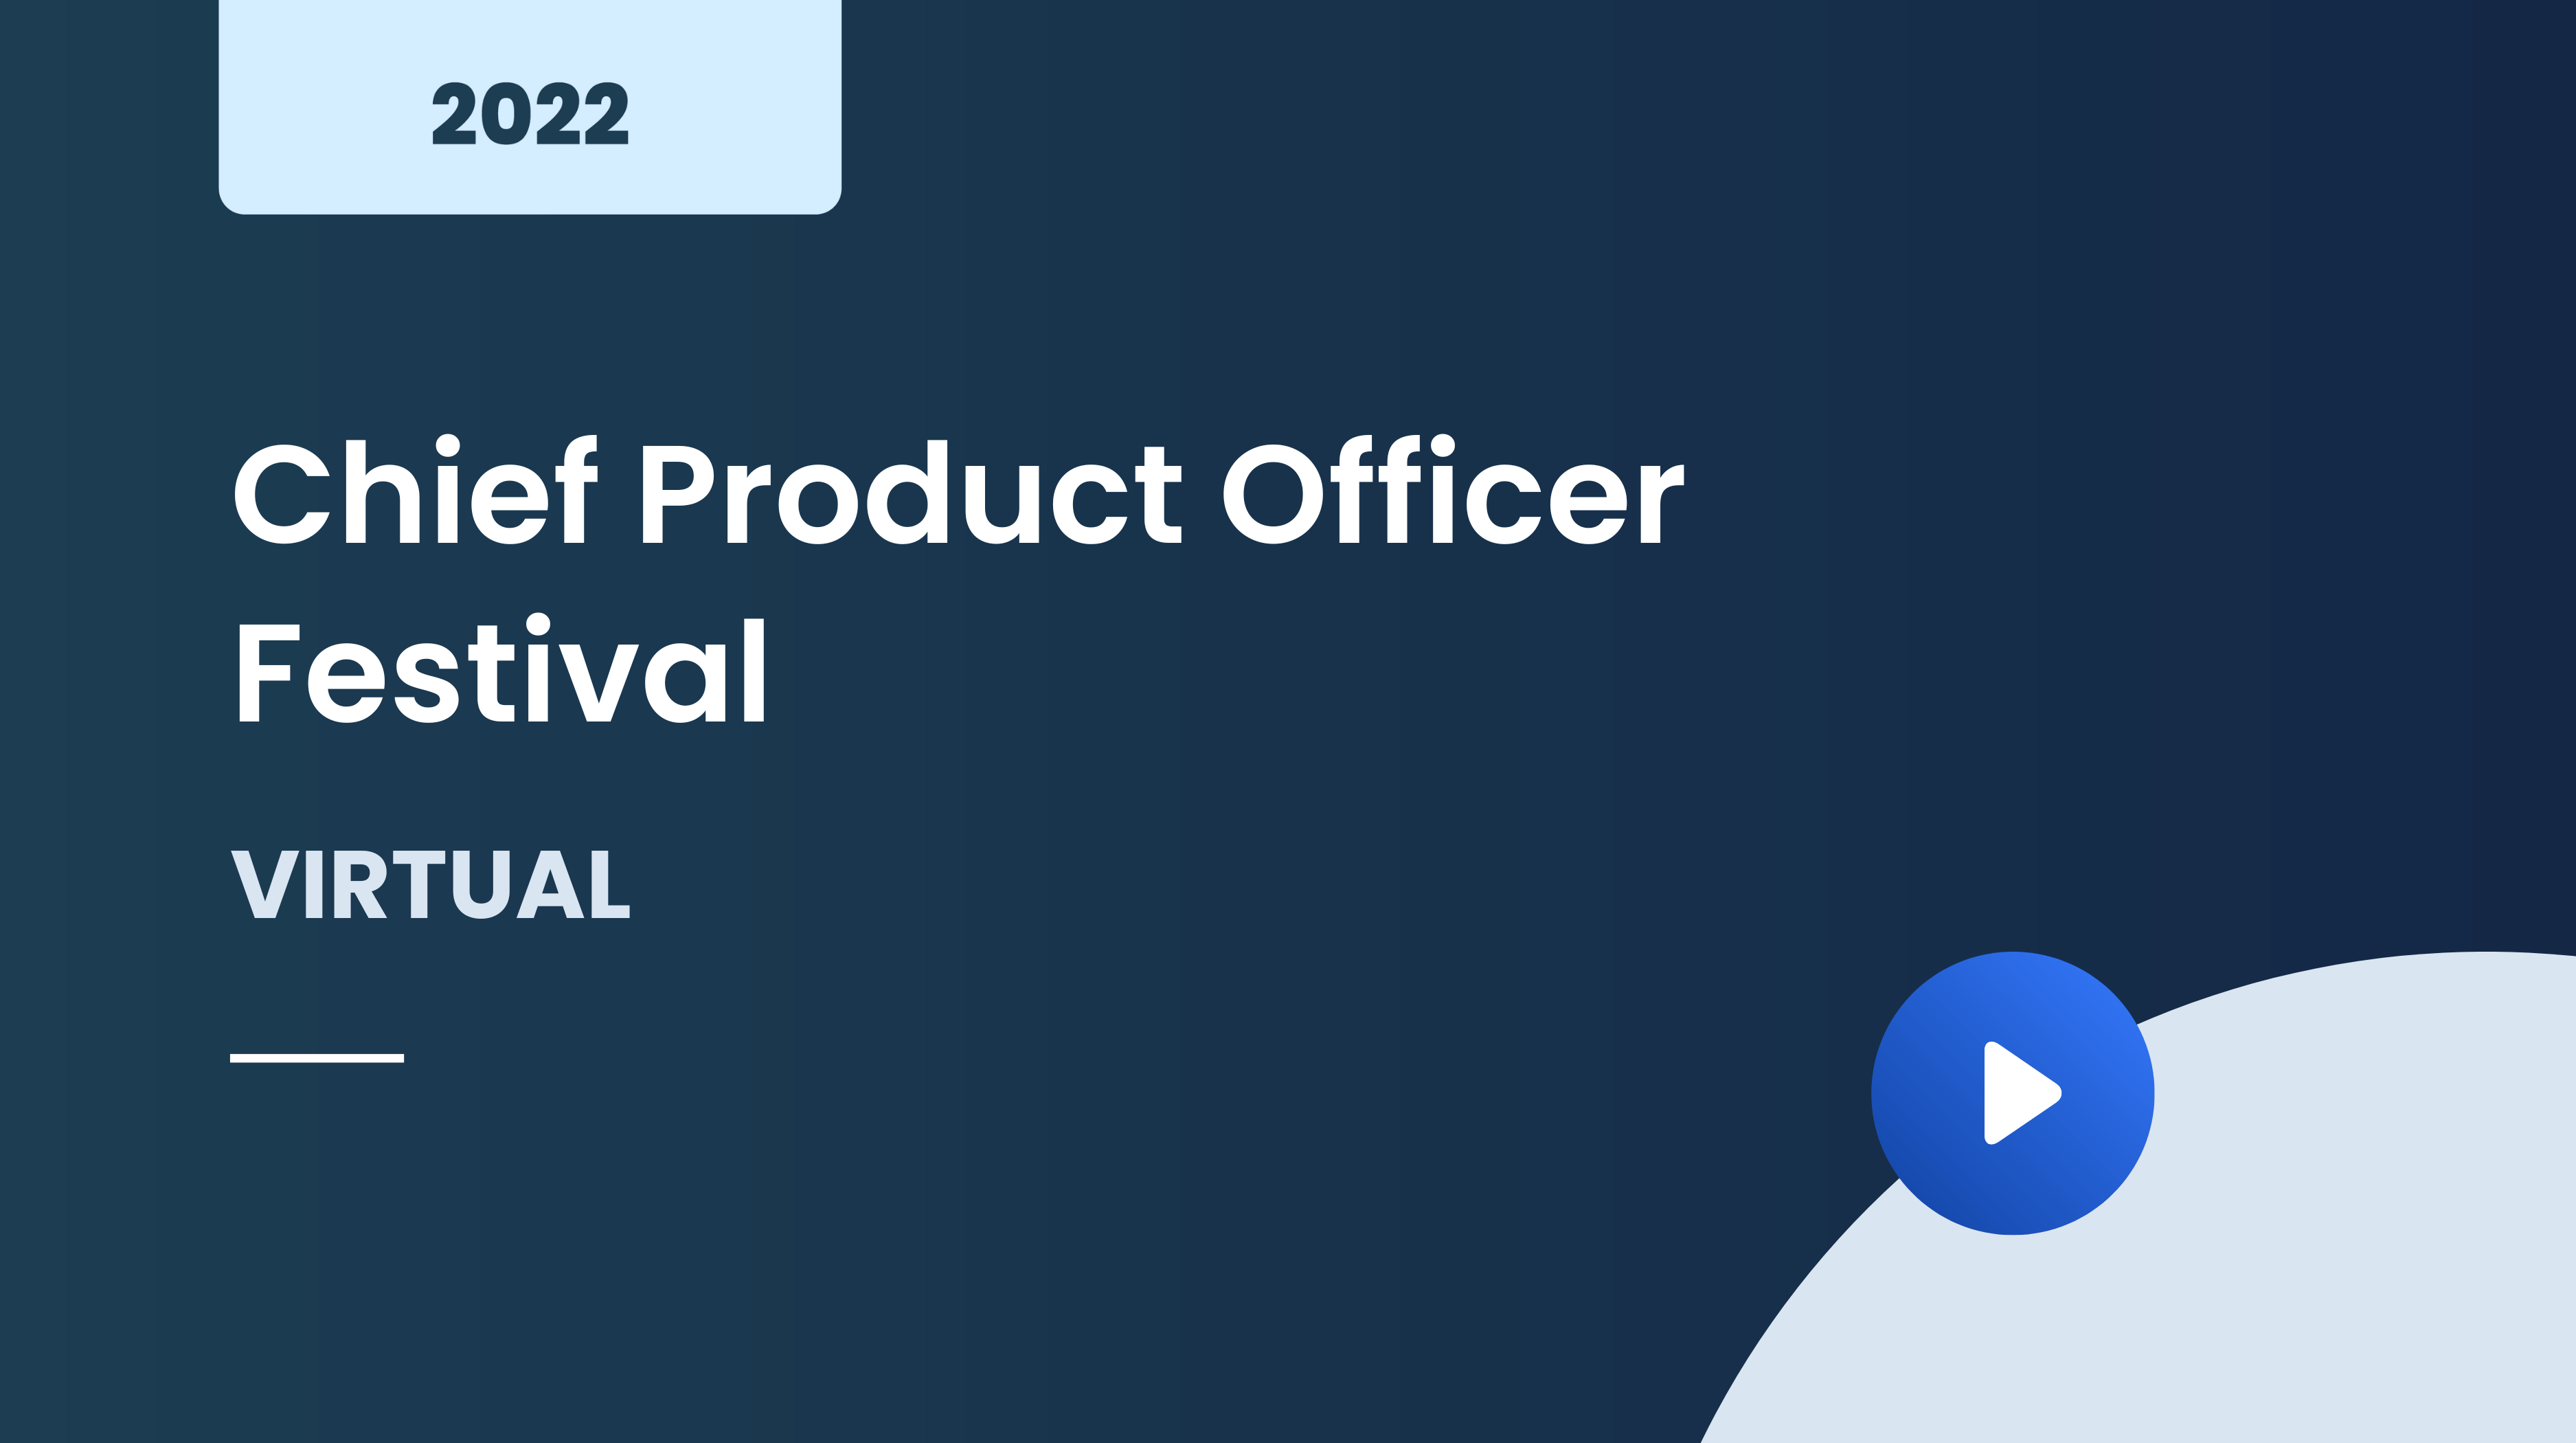 Chief Product Officer Festival November 2022